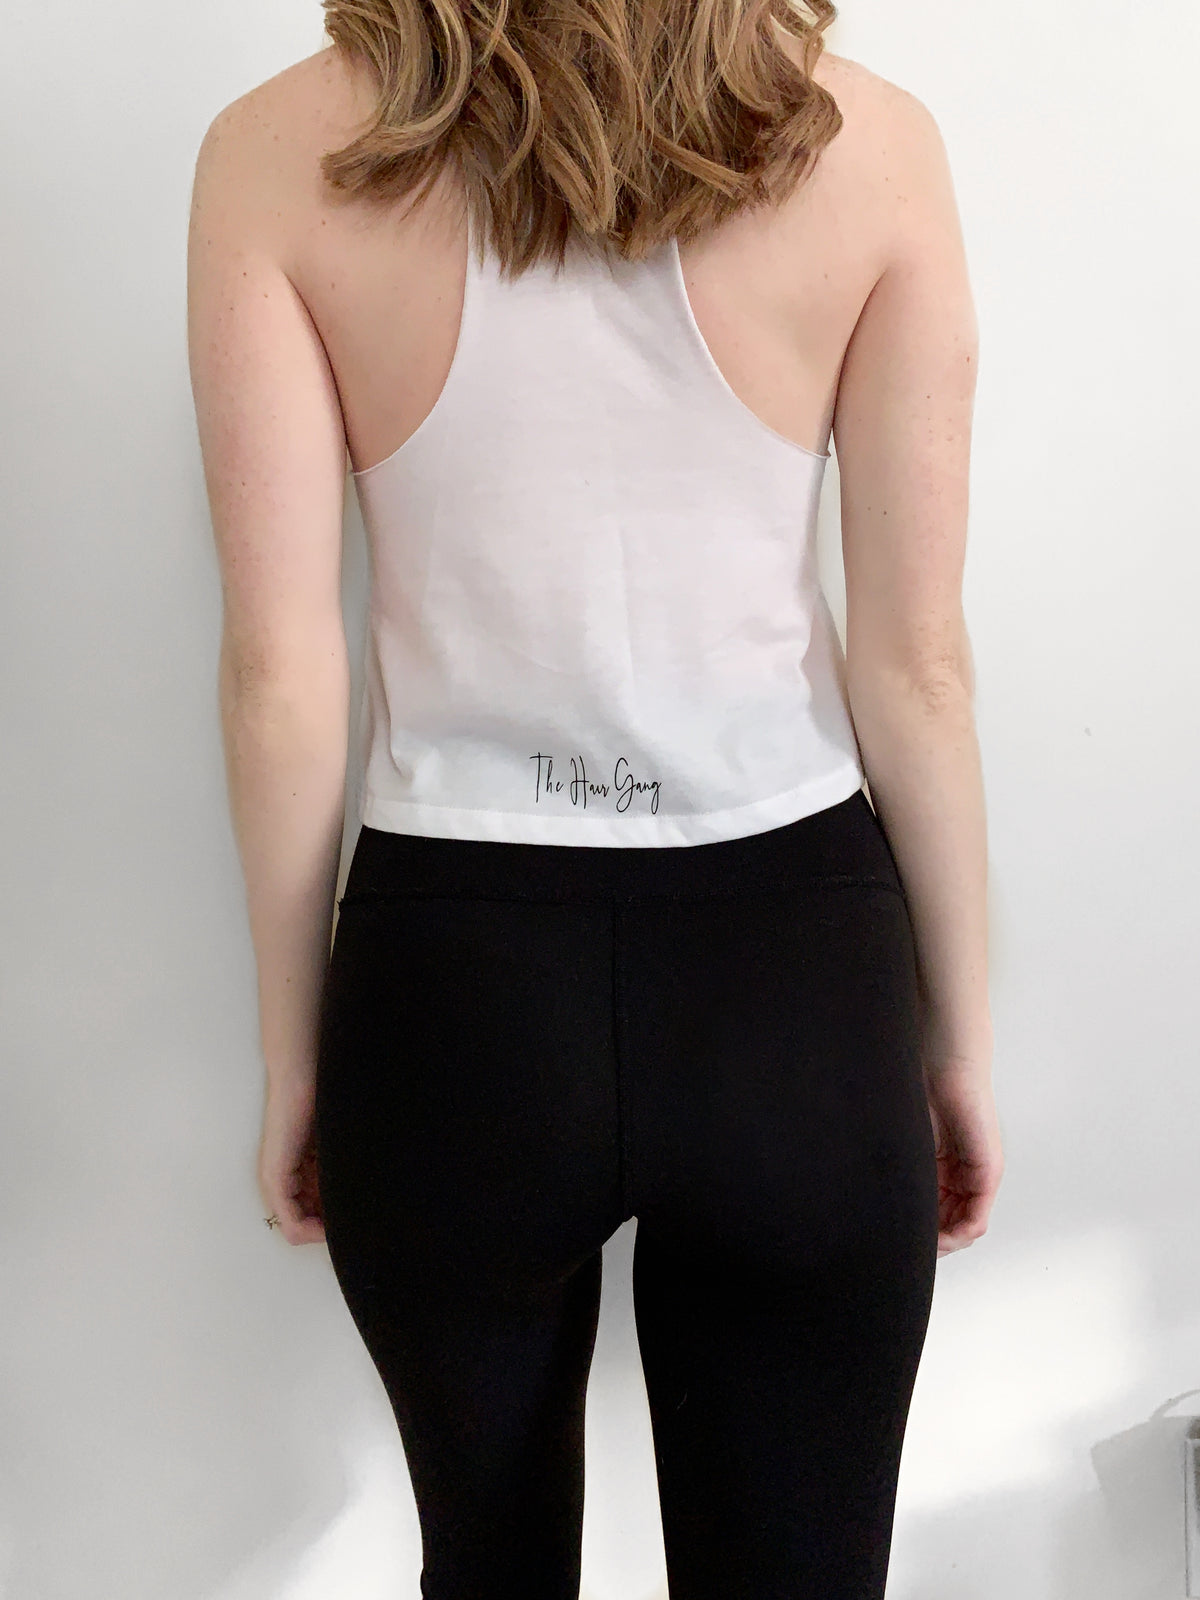 Support small business Bobby pin tank